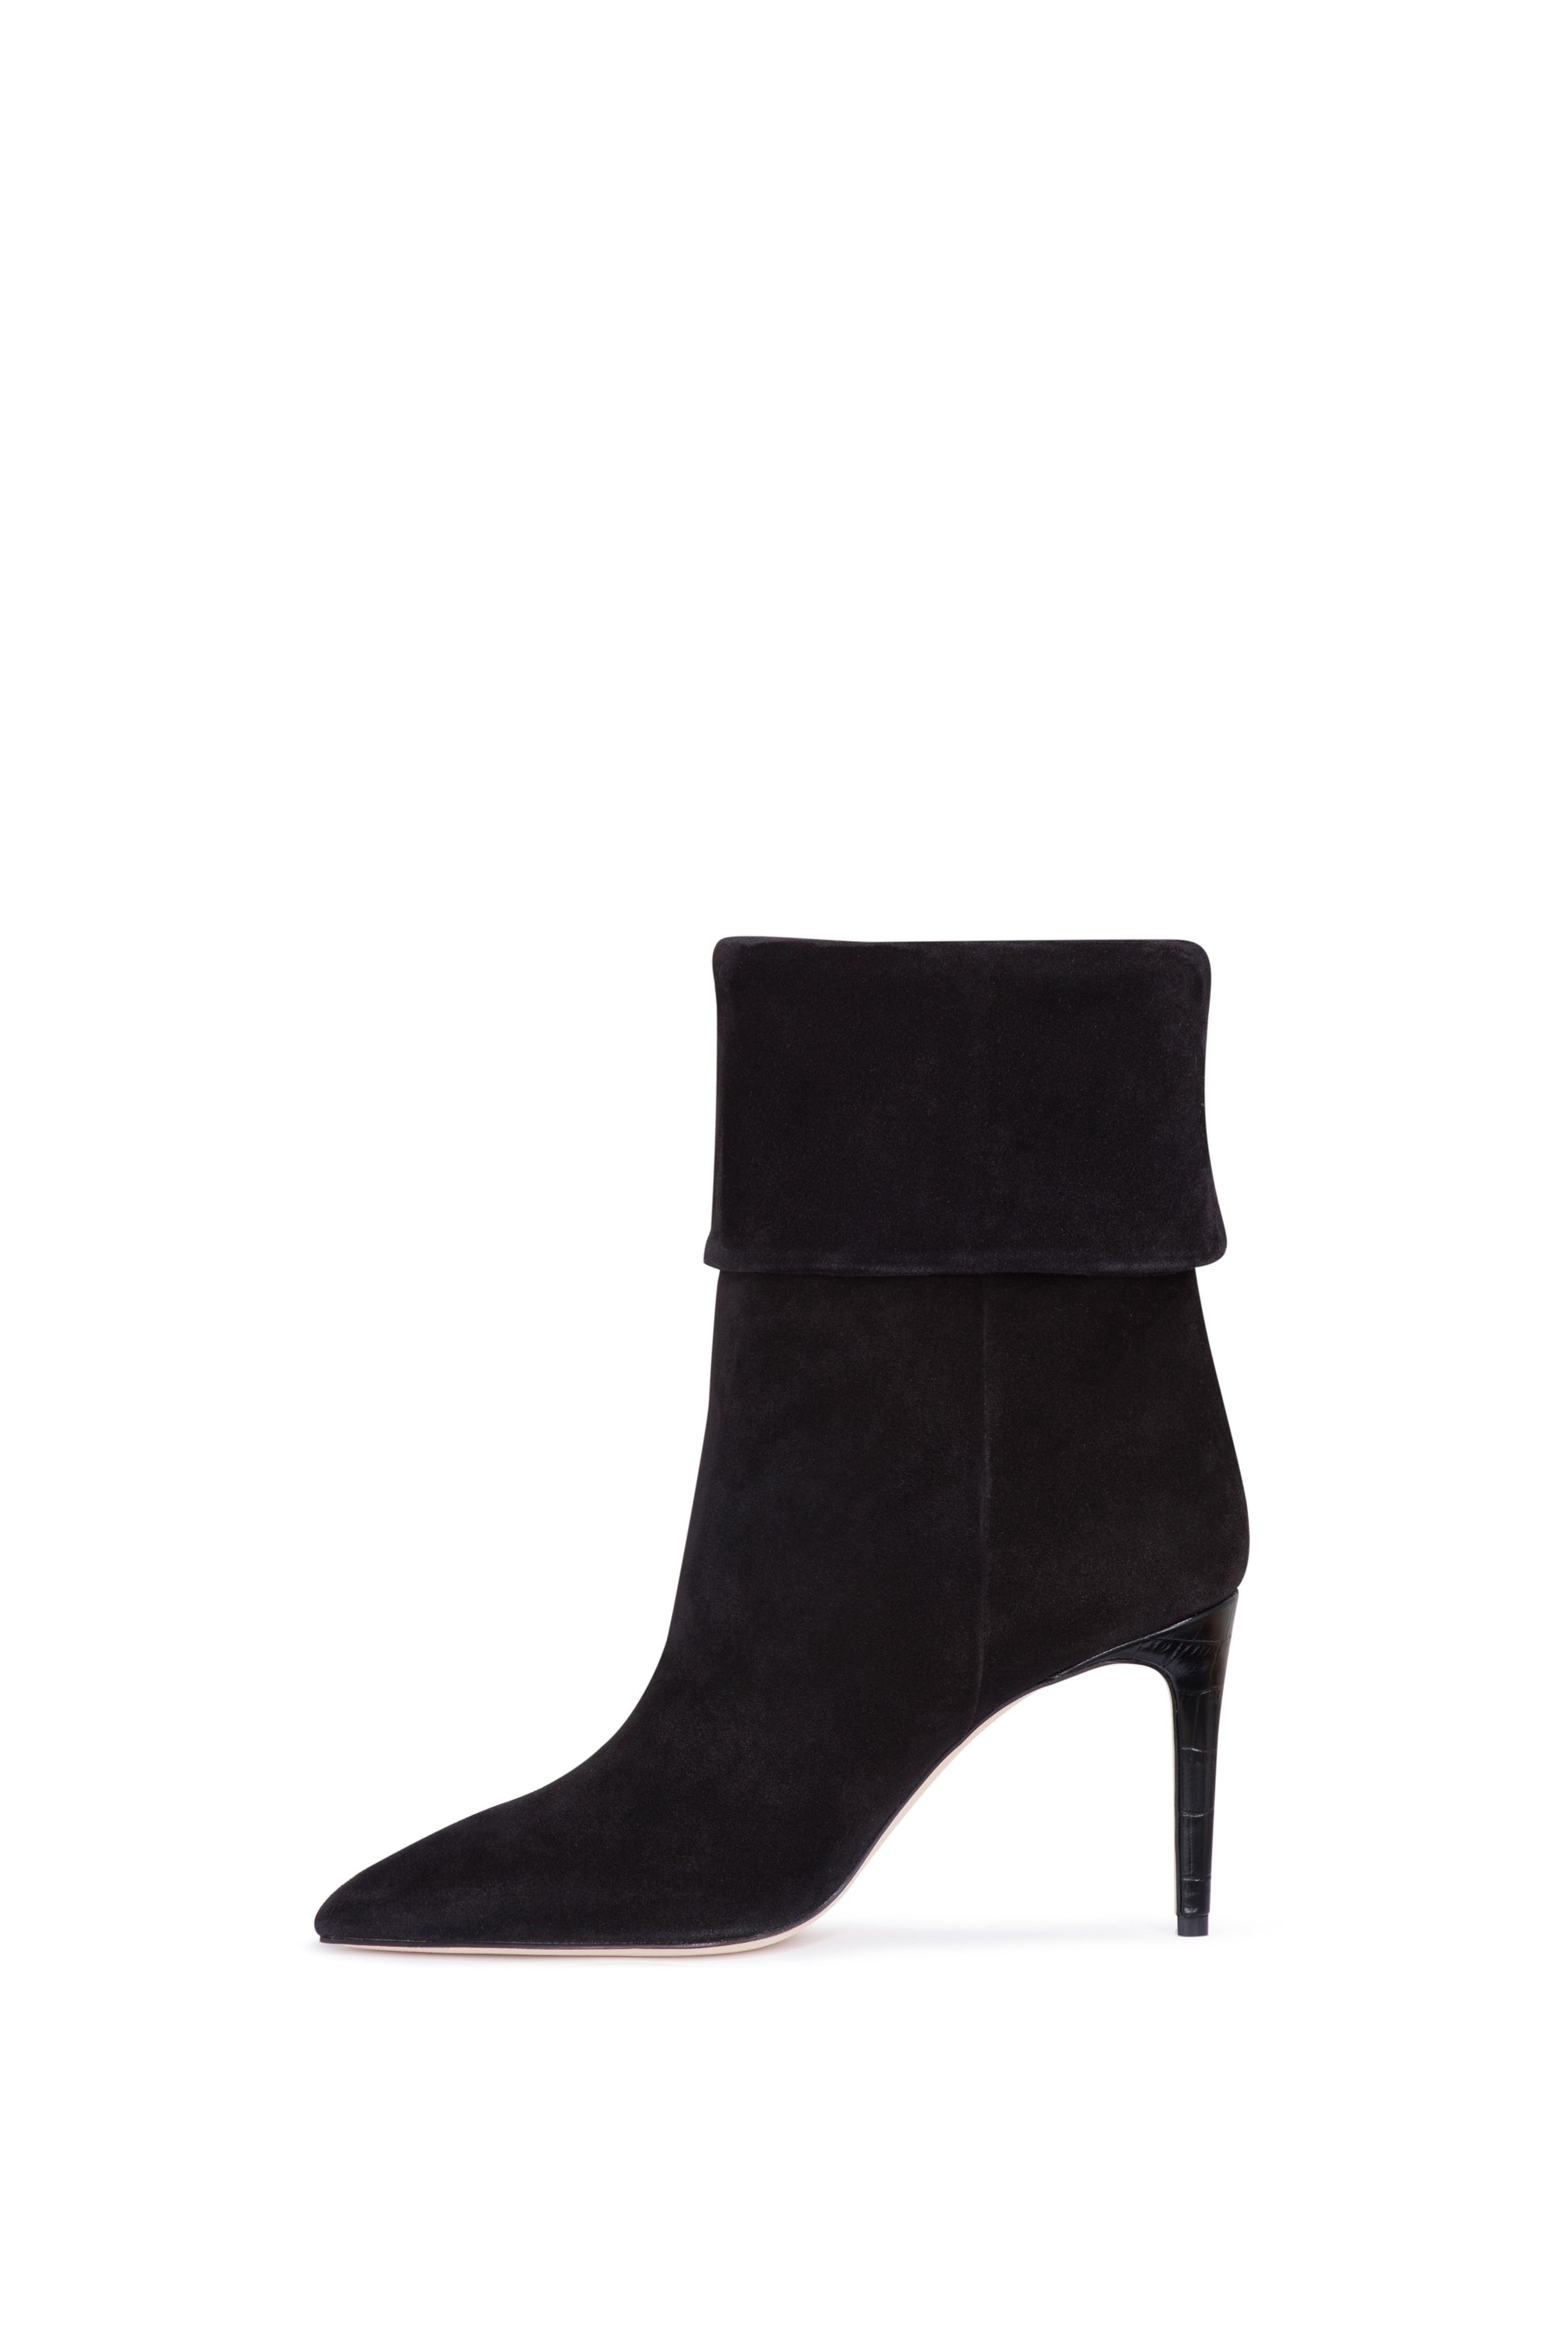 Black calf suede ankle boots with turn-down collar - Side